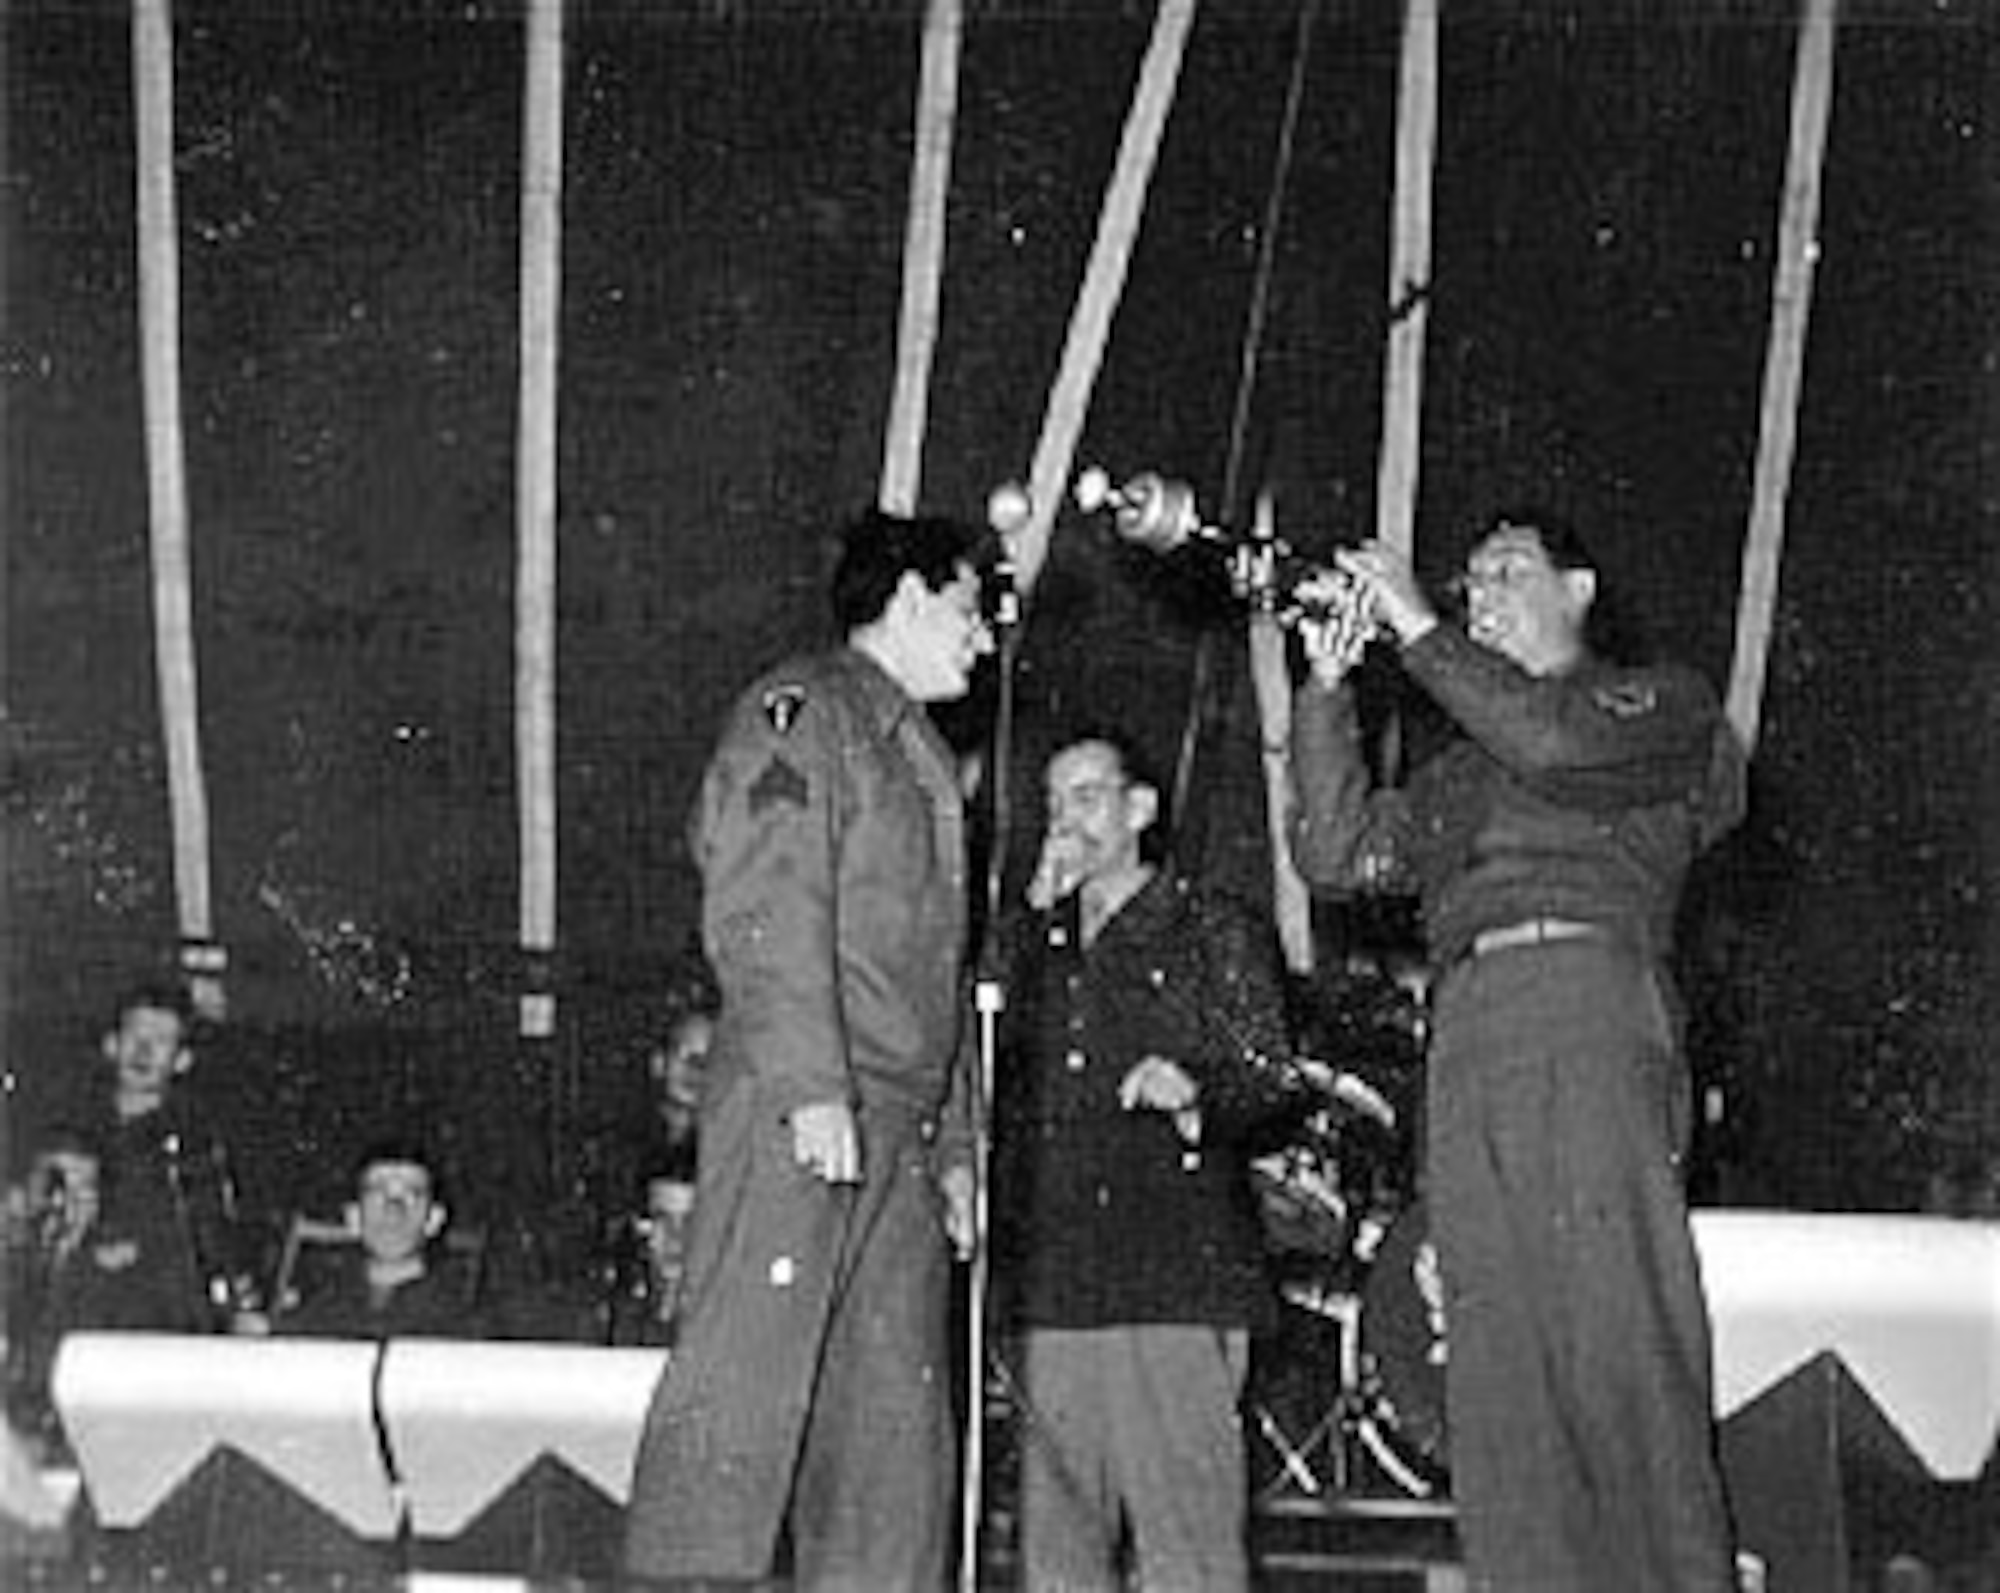 Another photograph of Maj. Glenn Miller and his band taken by the soldier in the audience. (U.S. Air Force photo)